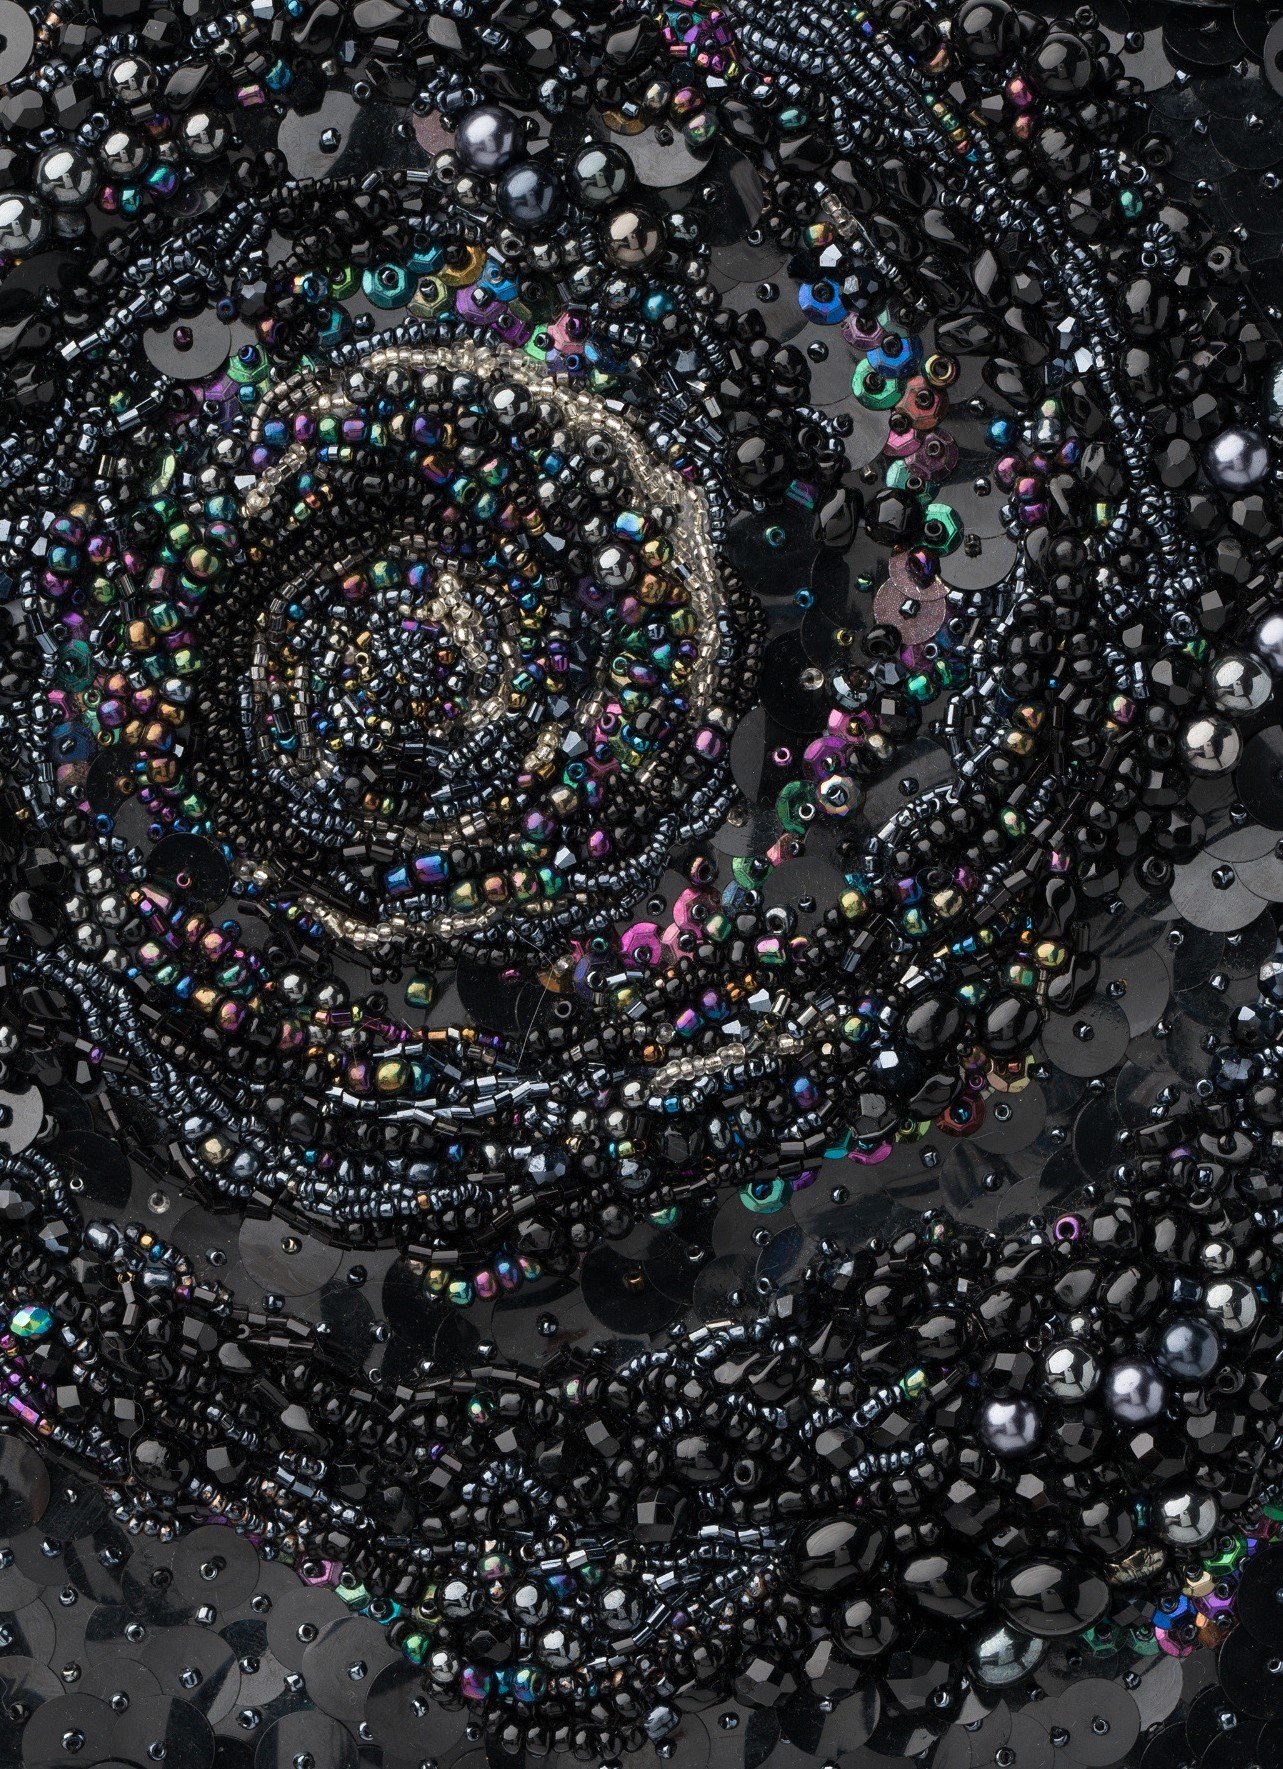   A moment eternal, no. 6 (black spiral)  (detail)  2020-2021   Beading of vintage and antique glass, plastic, pearls, swarovski crystal, hematite, jet, polyester thread, on synthetic fabric over canvas  20cm x 16cm x 3cm  Photography by Matthew Stan